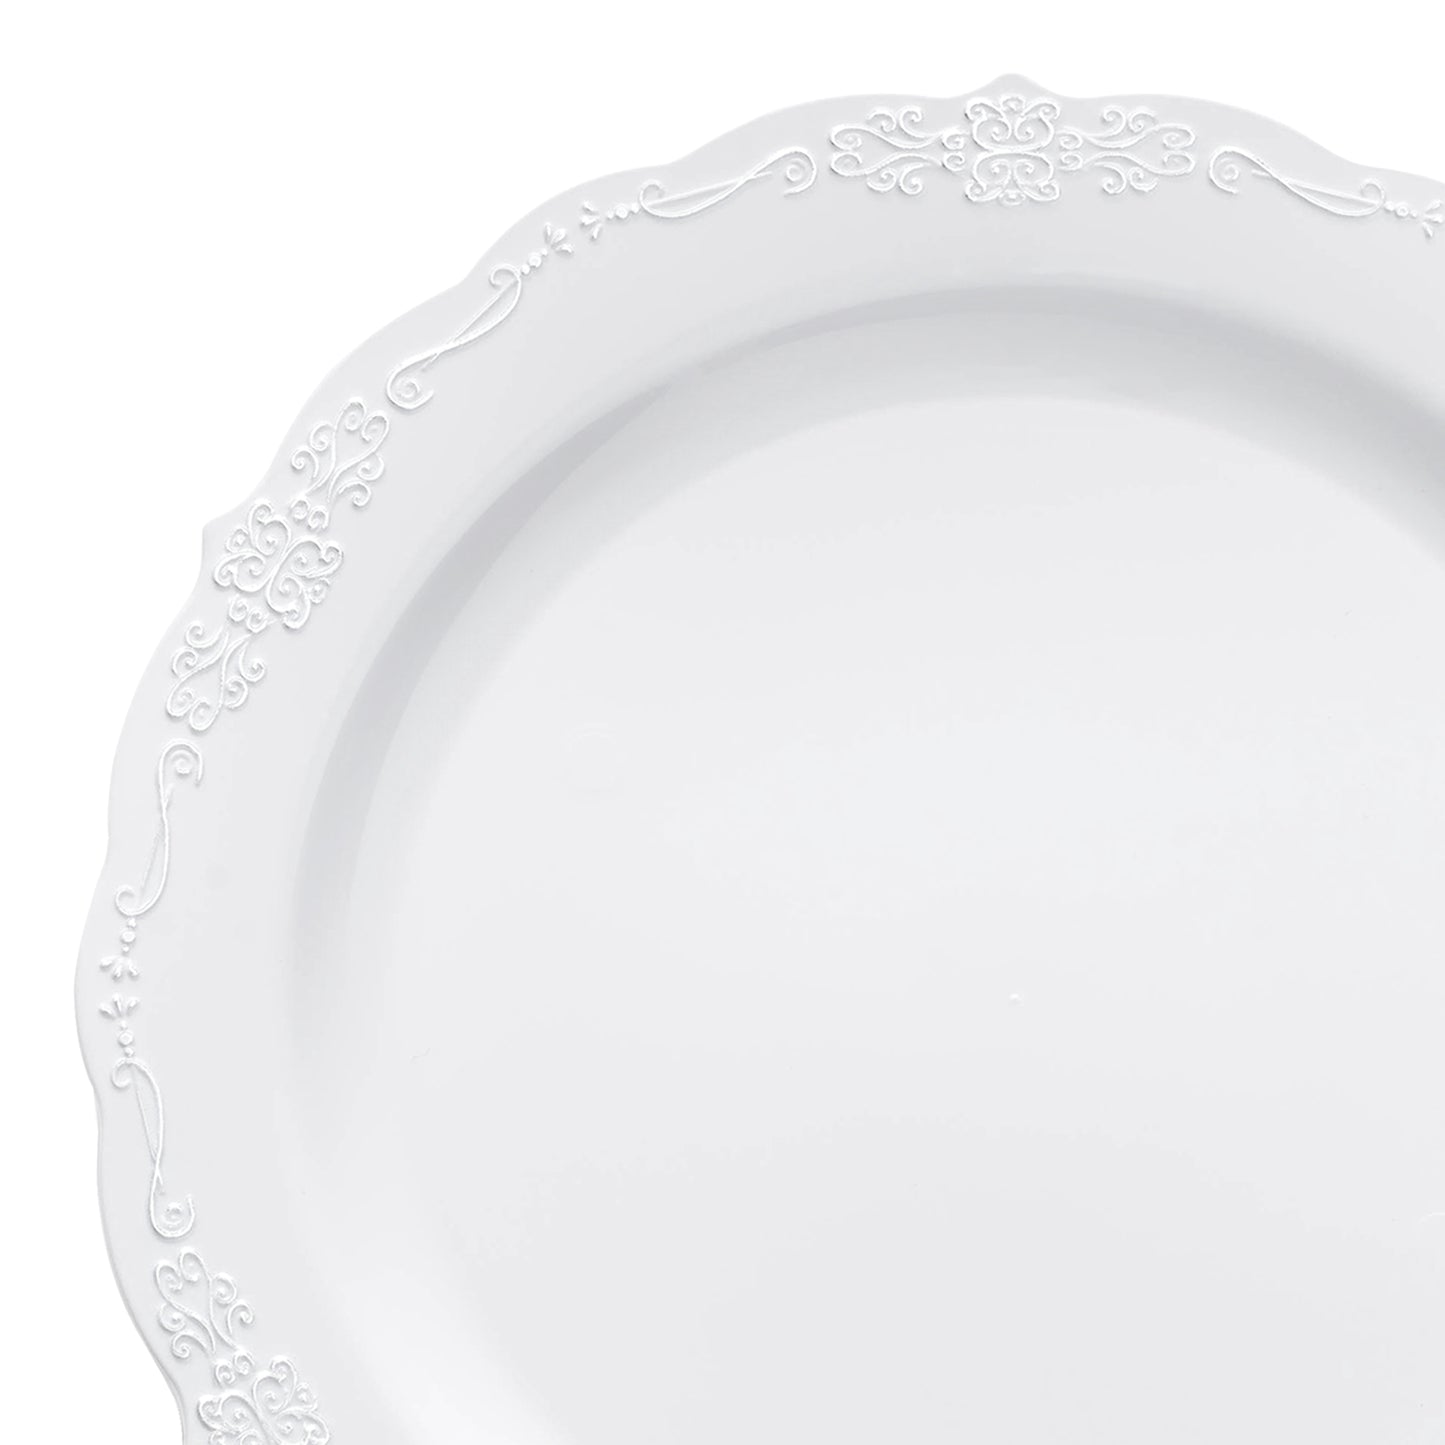 White with Silver Vintage Rim Round Disposable Plastic Appetizer/Salad Plates (7.5") | The Kaya Collection